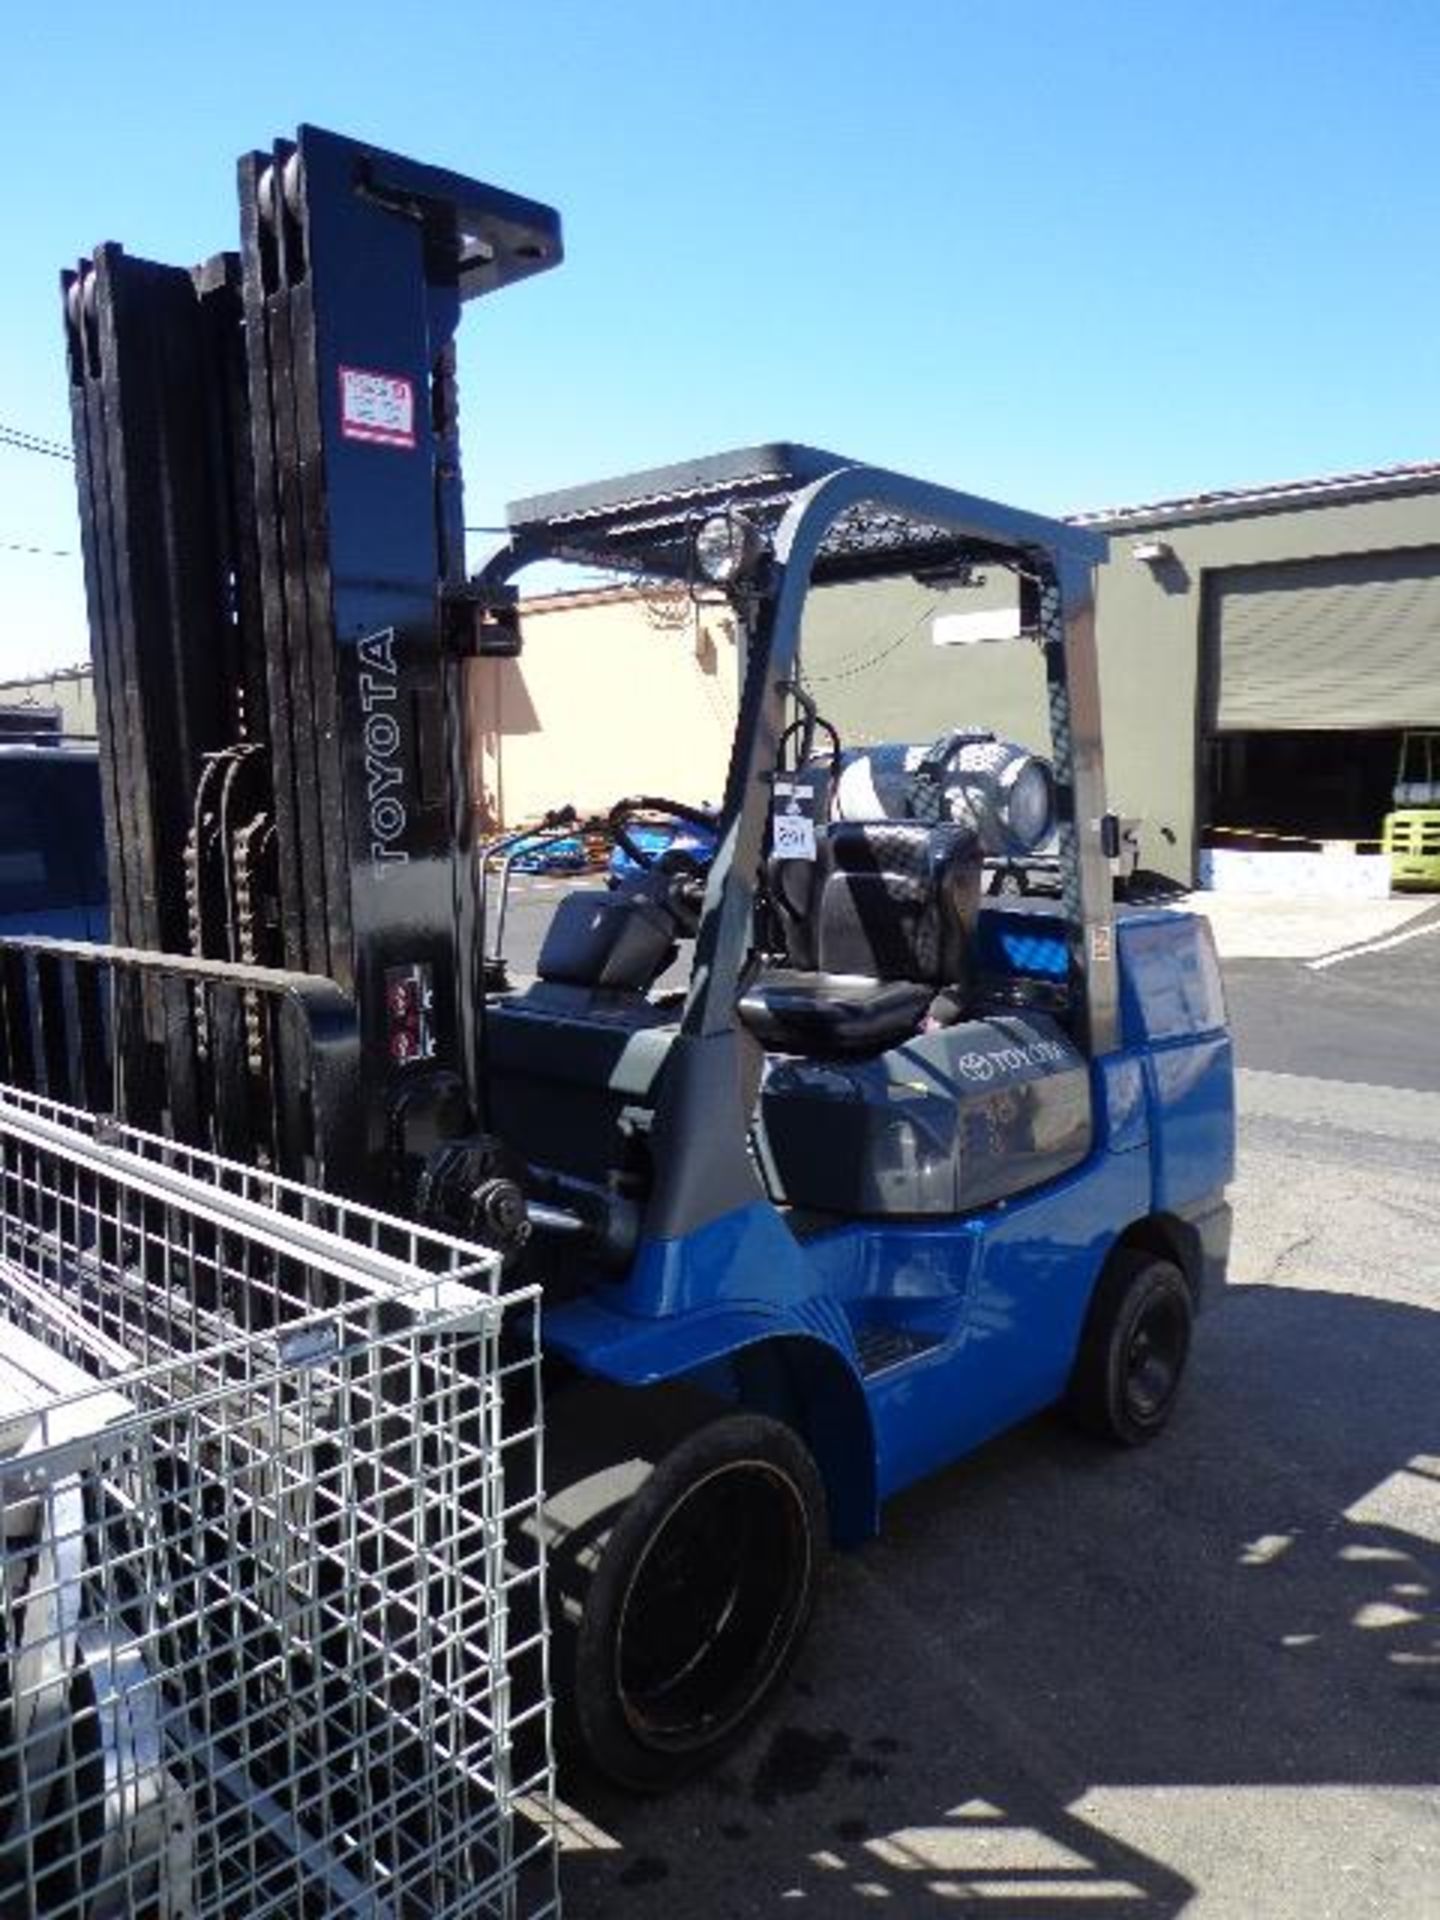 Toyota 7FGCU45 9000 Lb Cap LPG Forklift s/n 70247 w/ 3-Stage Mast, 187” Lift Height, SS, SOLD AS IS